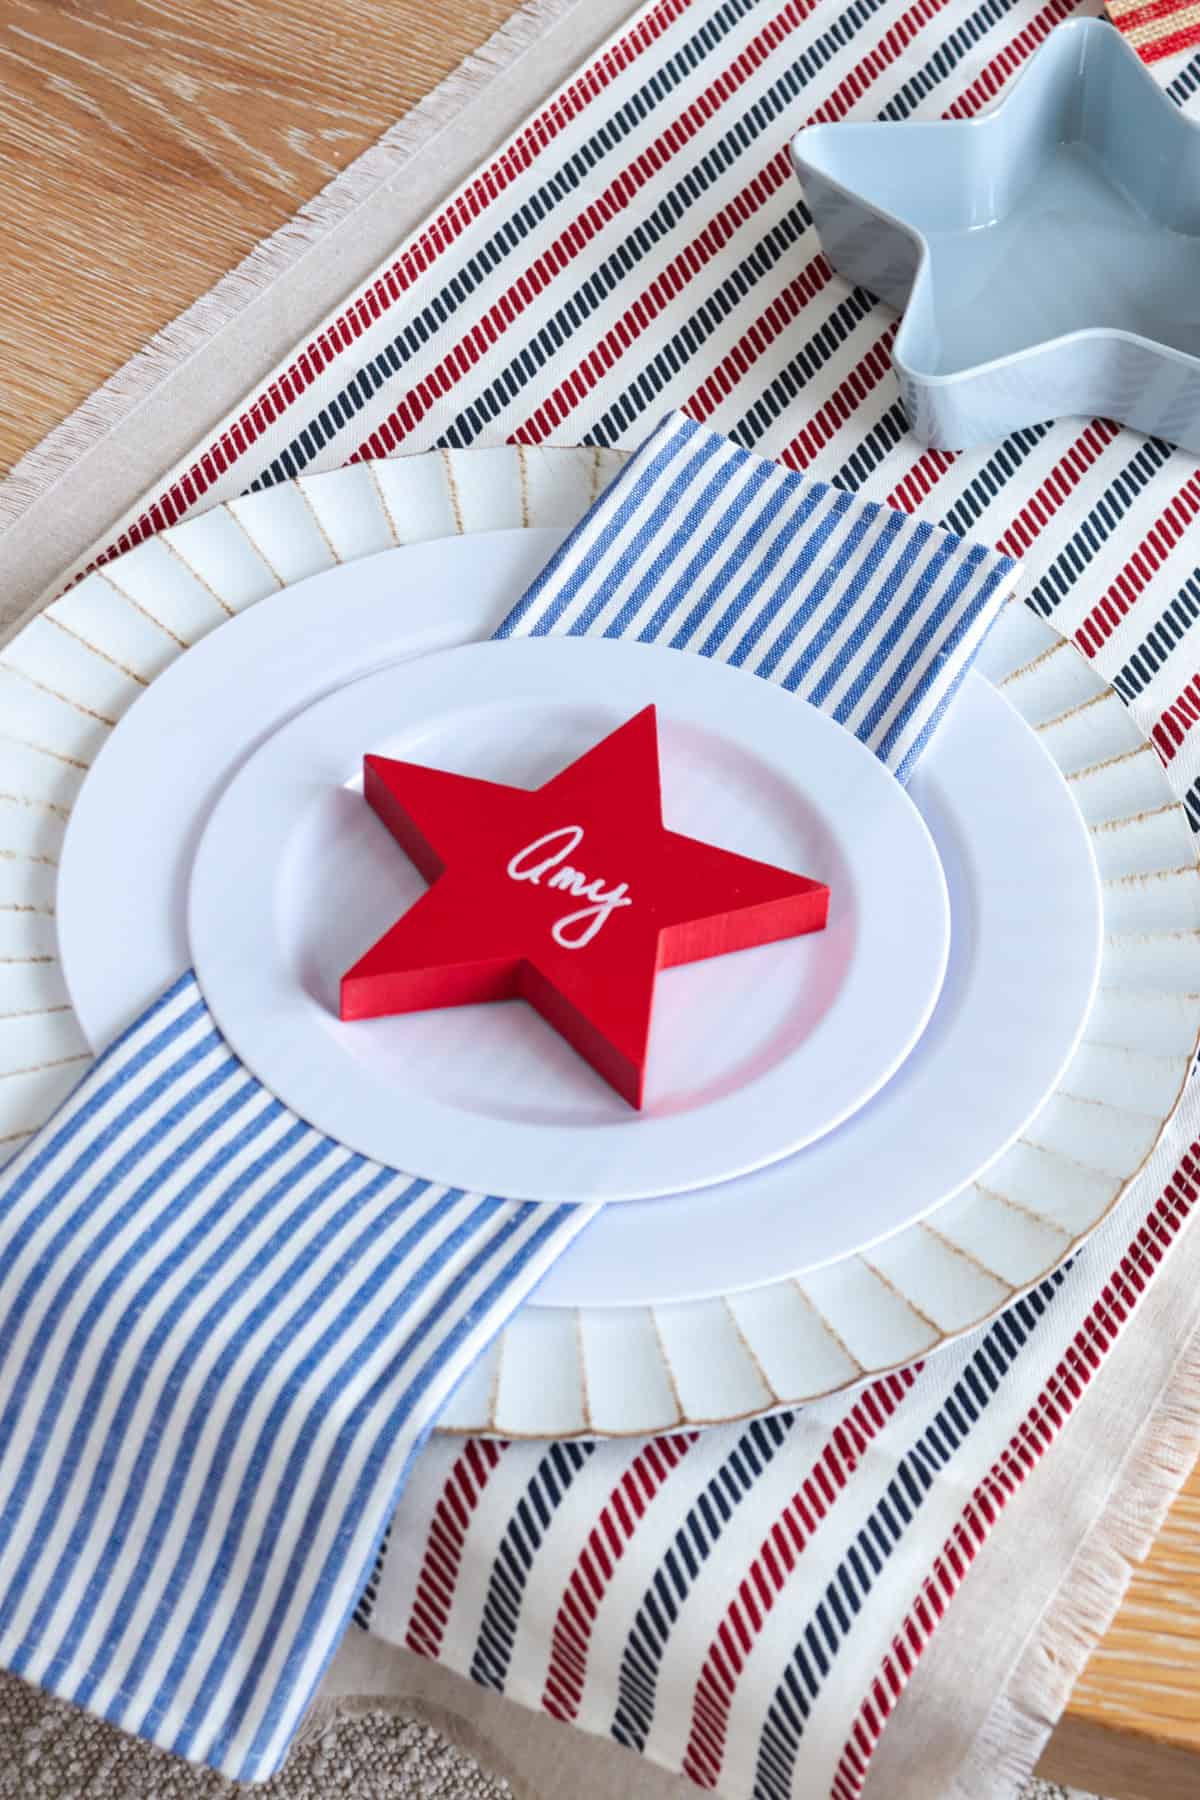 Place setting with red star and name written on it.